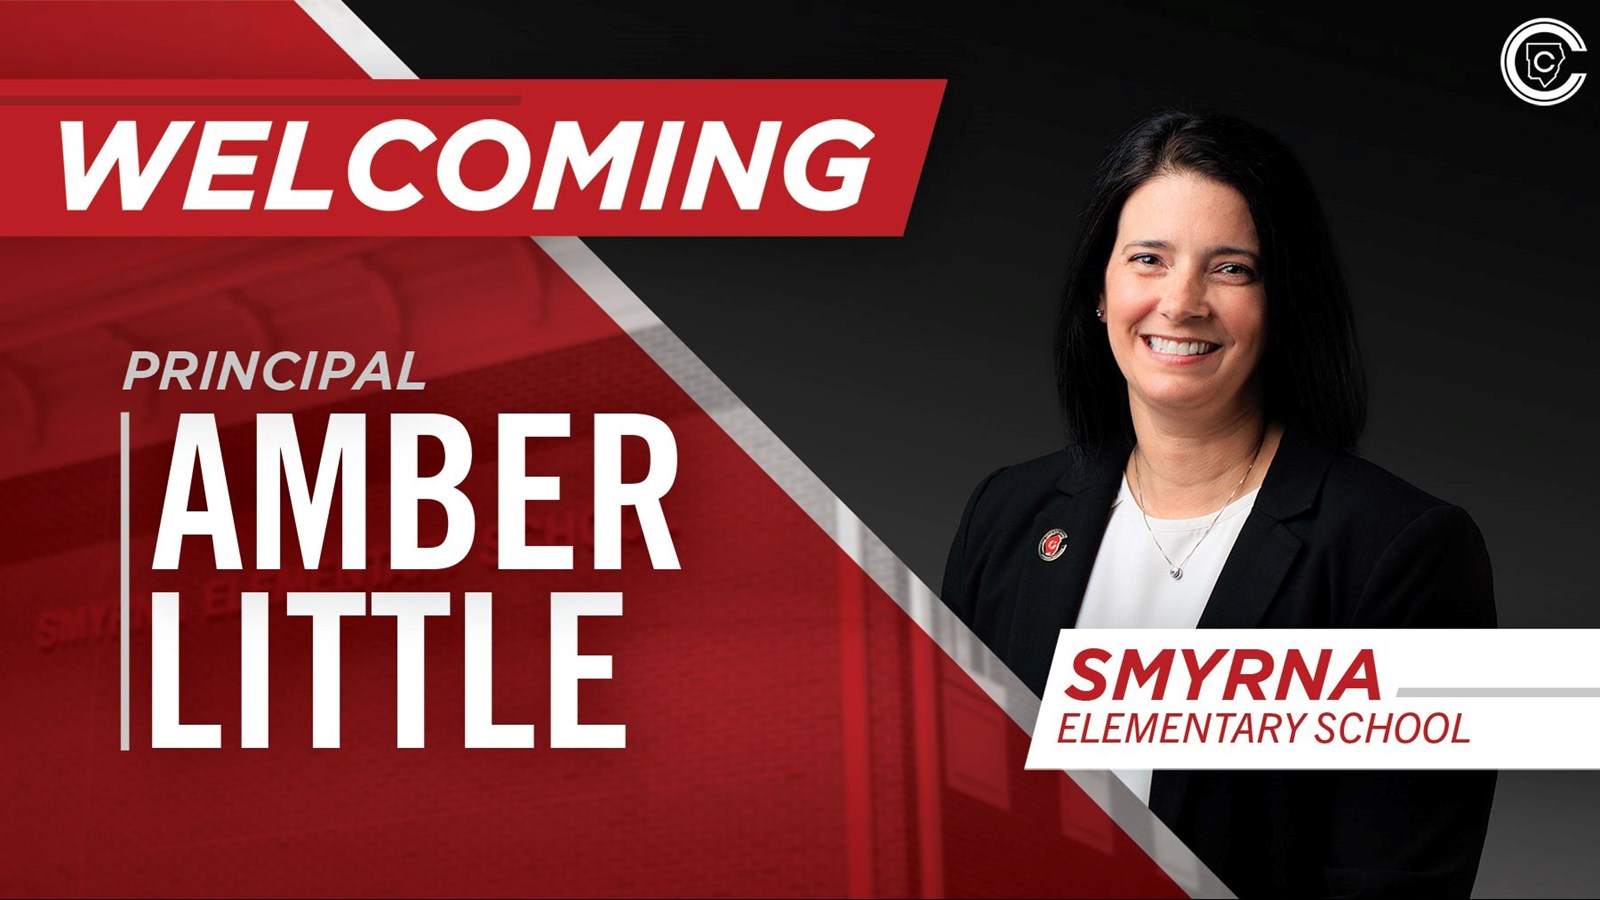 Principal Amber Little is the new principal of Smyrna Elementary School.